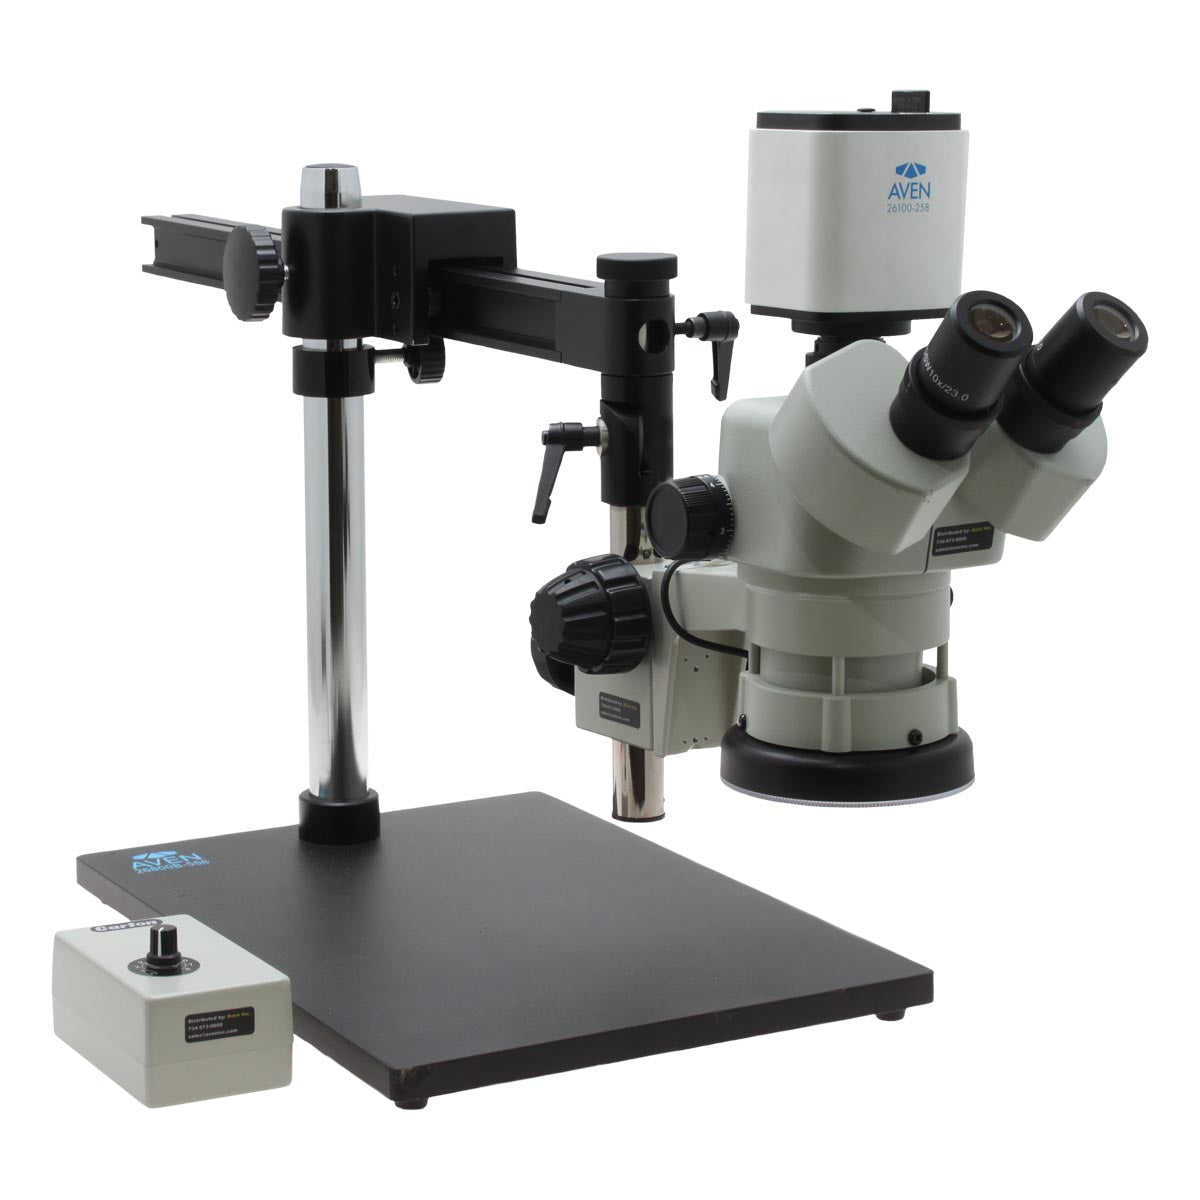 Stereo Zoom Microscope SPZV-50 [6.7x - 50x] on Ultra Glide Stand with Tiltable Arbor and Mighty Cam Pro Auto Focus Camera